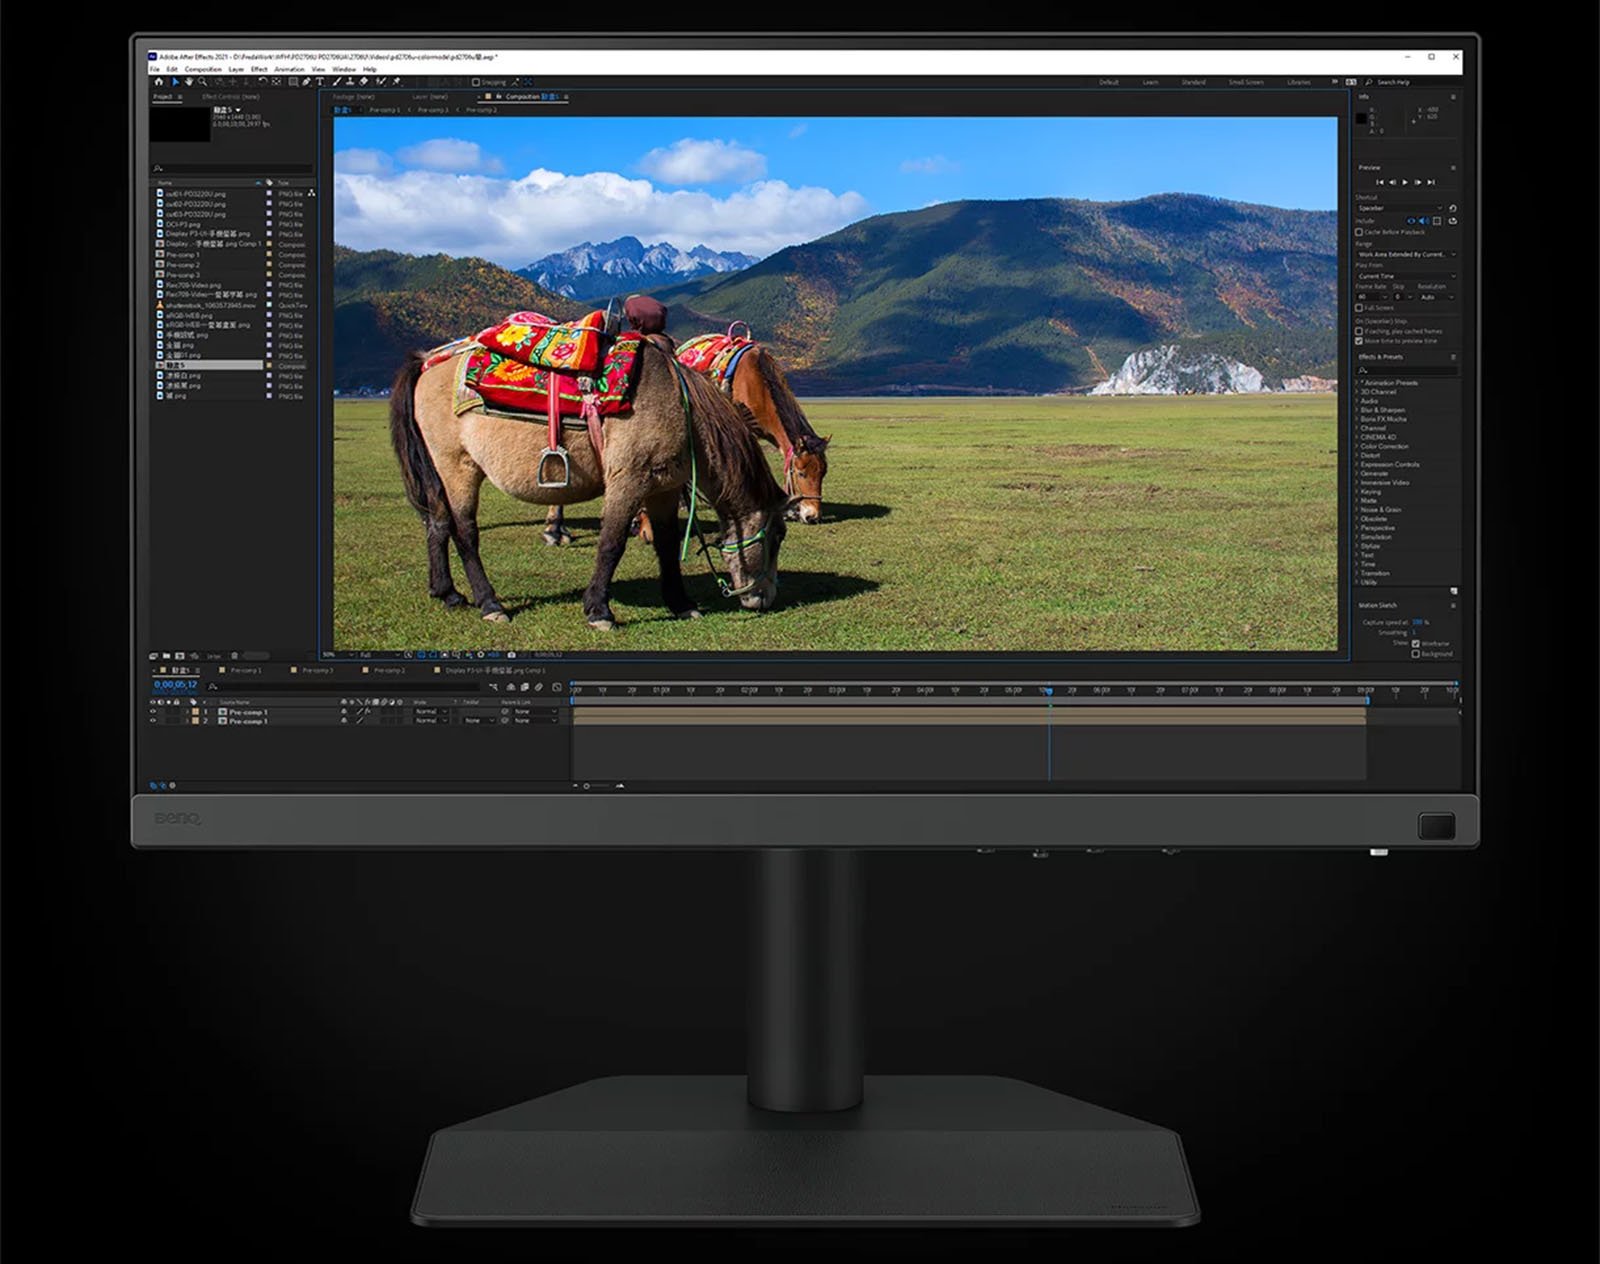 A computer monitor displaying a photo editing software interface with an image of two horses saddled with vibrant textiles in a scenic grassy field against a backdrop of mountains.